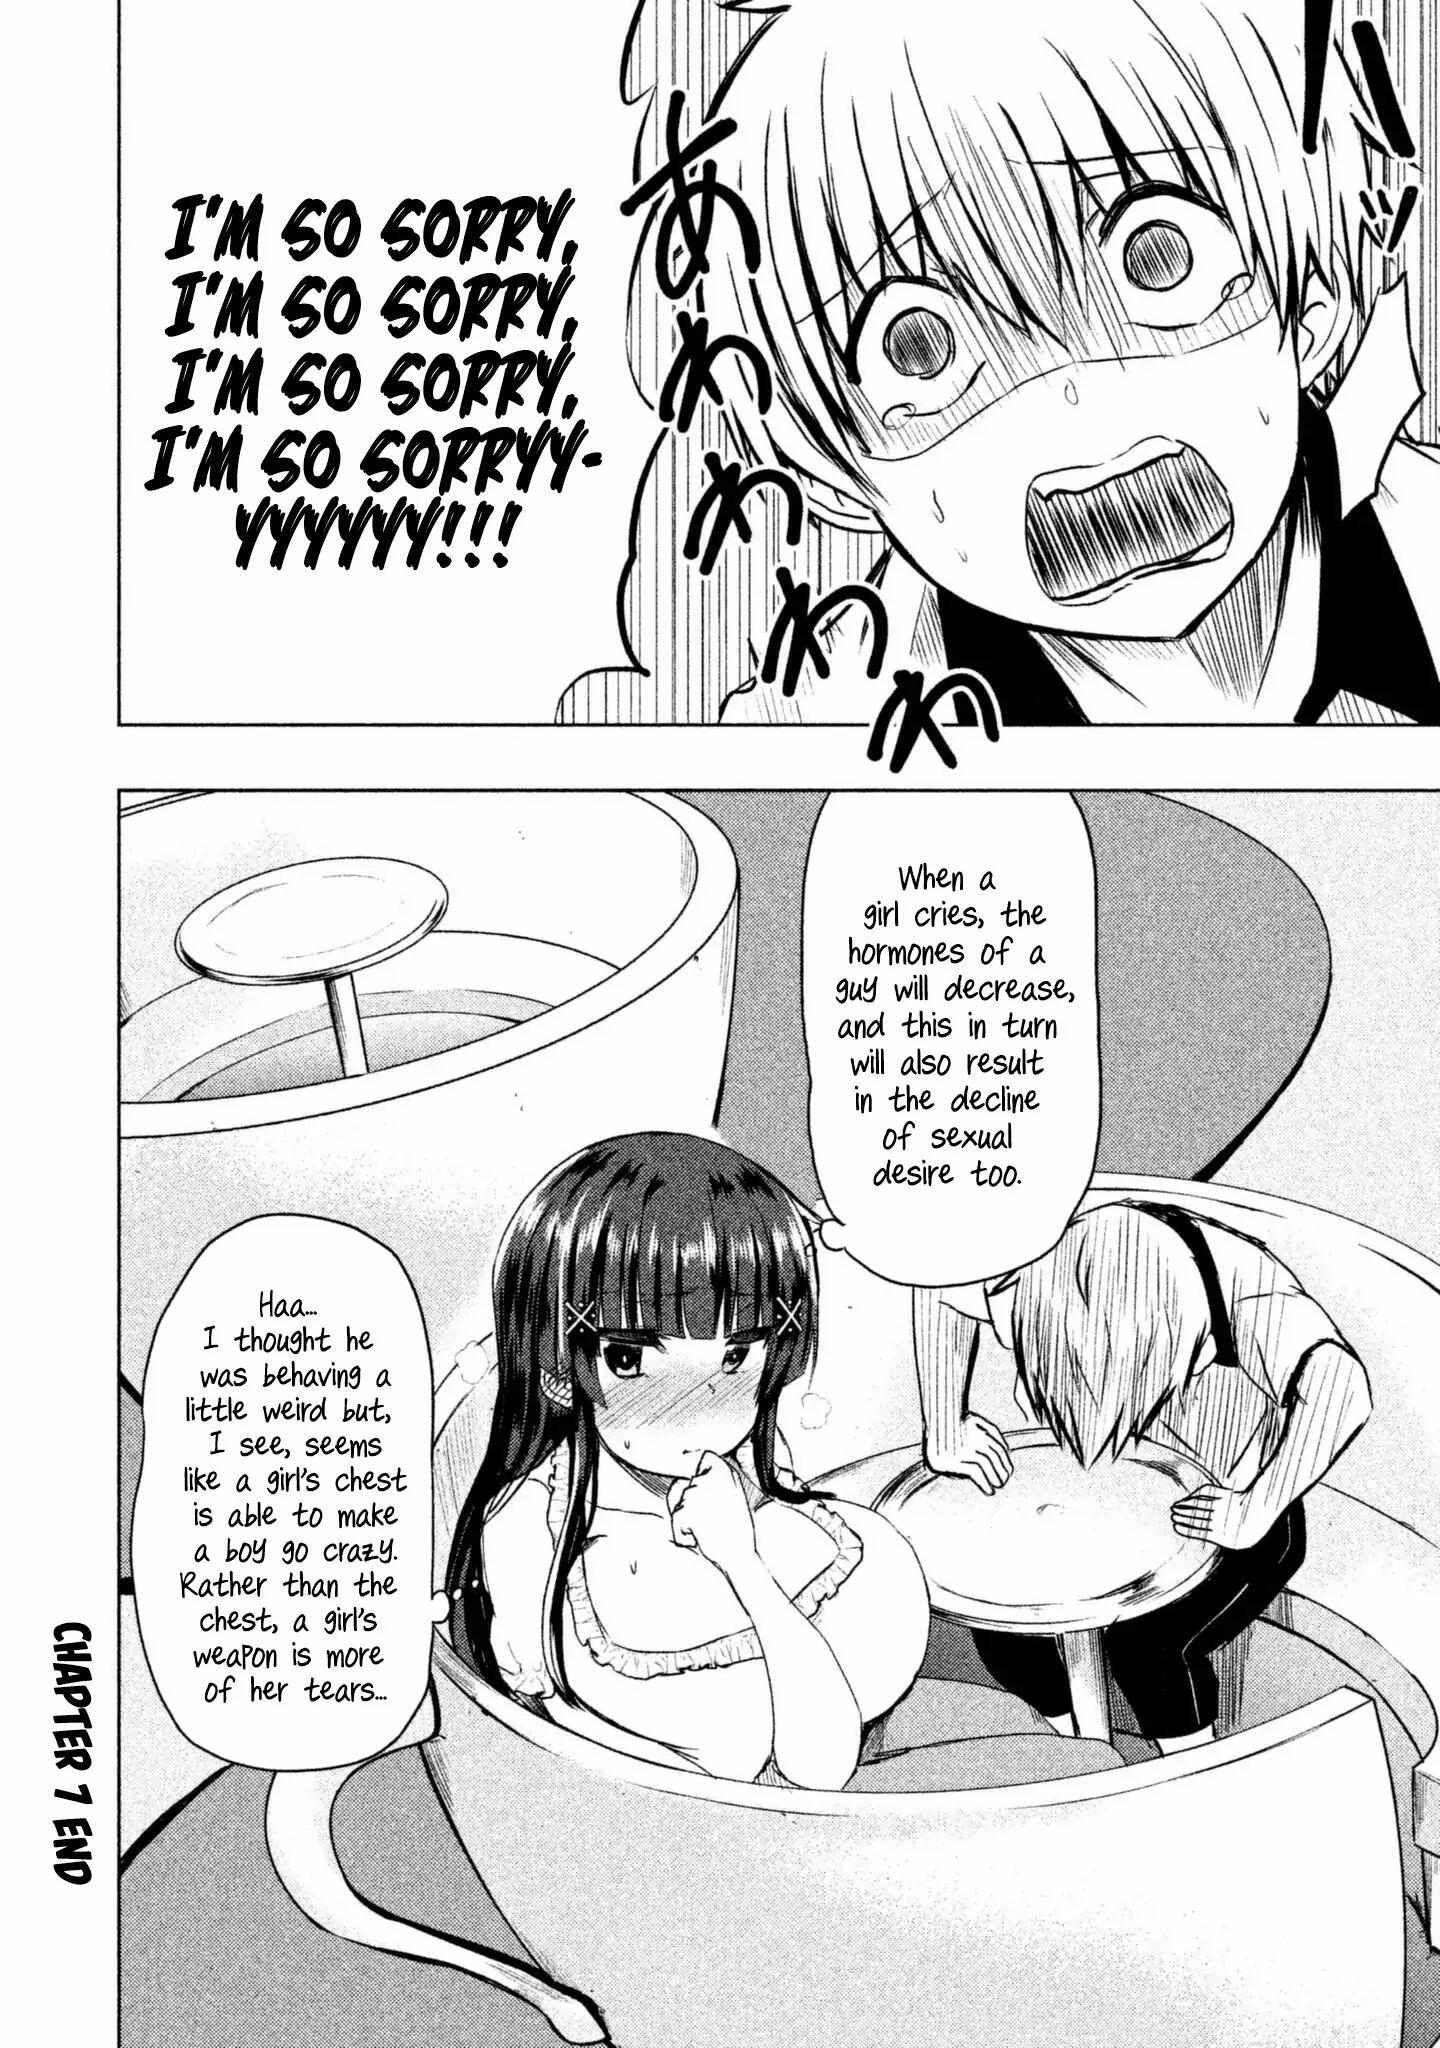 A Girl Who Is Very Well-Informed About Weird Knowledge, Takayukashiki Souko-San Vol.1 Chapter 7: Sensation page 9 - Mangakakalots.com